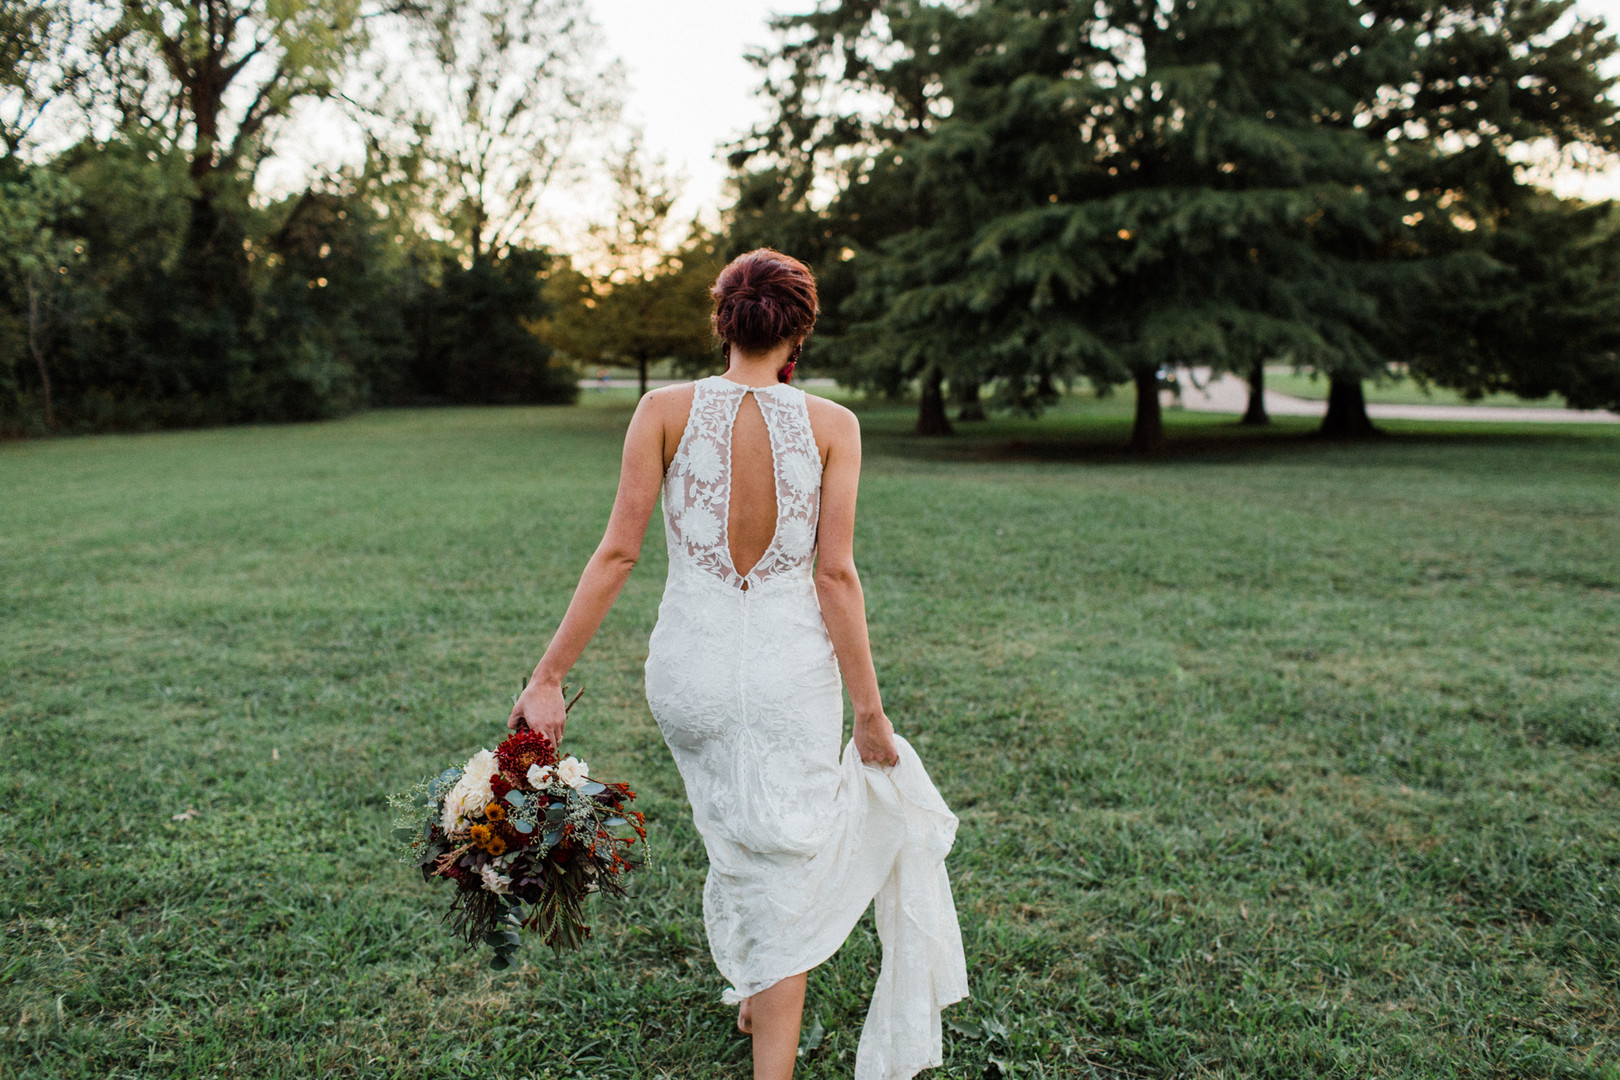 McCurdy_Bloom_LaurenBloomPhotography_MoodyDallasBridalsLaurenBloomPhotography30of37_big.jpg